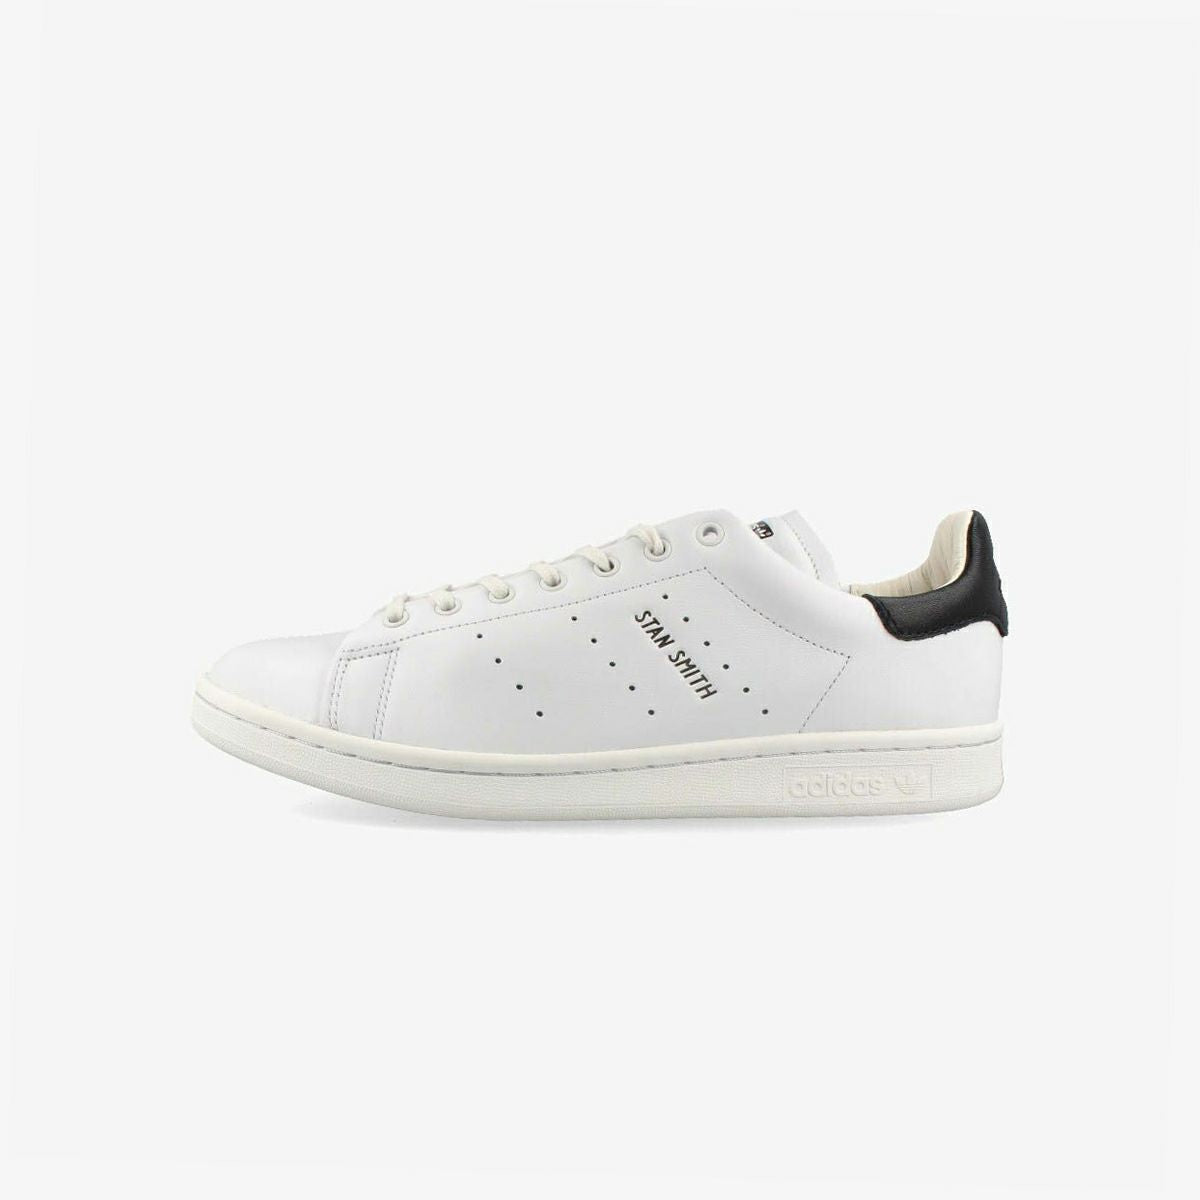 adidas STAN SMITH LUX CRYSTAL WHITE/OFF WHITE/CORE BLACK hq6785